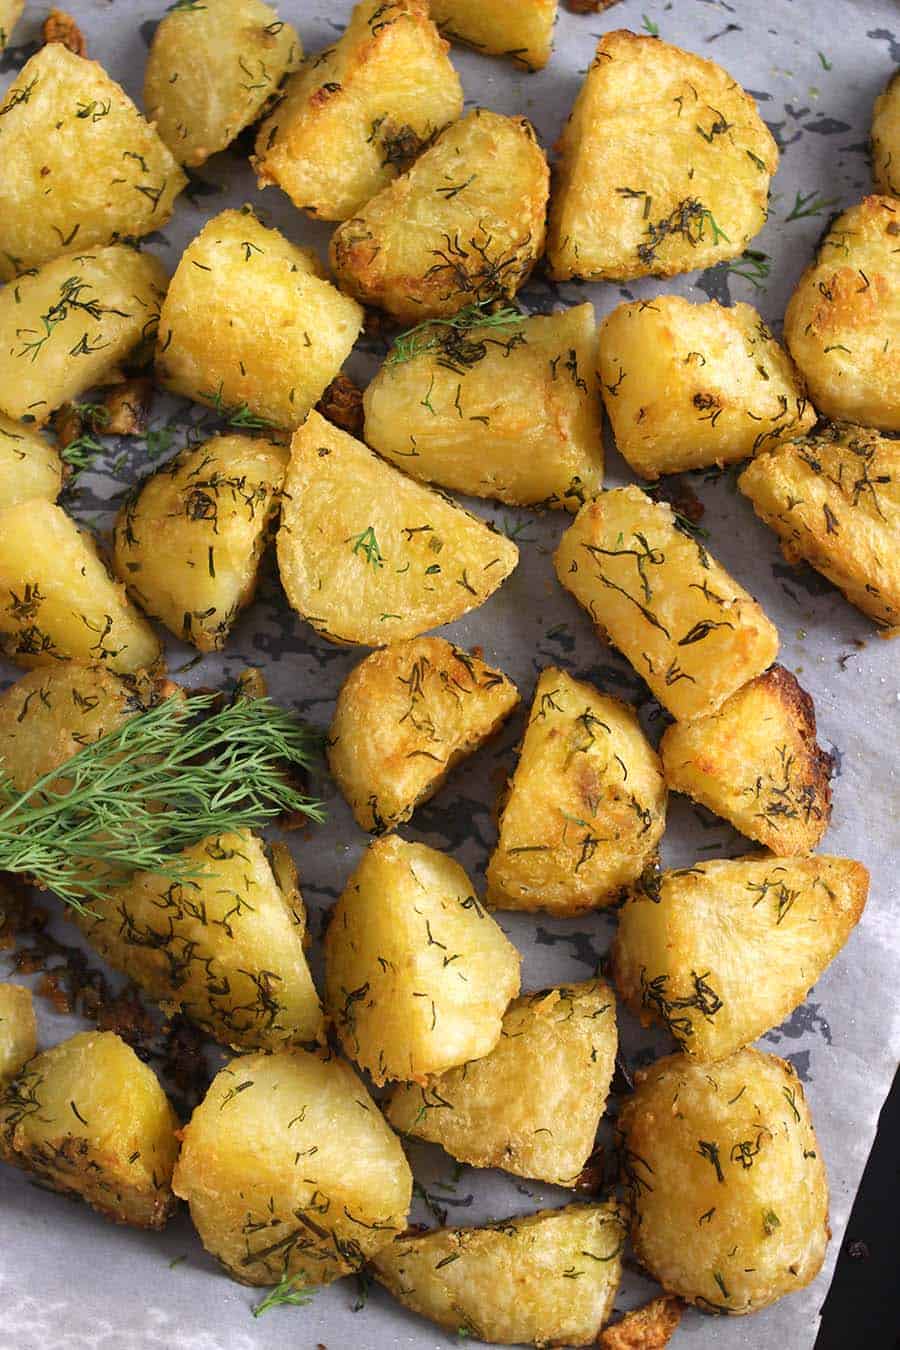 Crispy roasted potatoes - oven , instant pot, air fryer, stove top